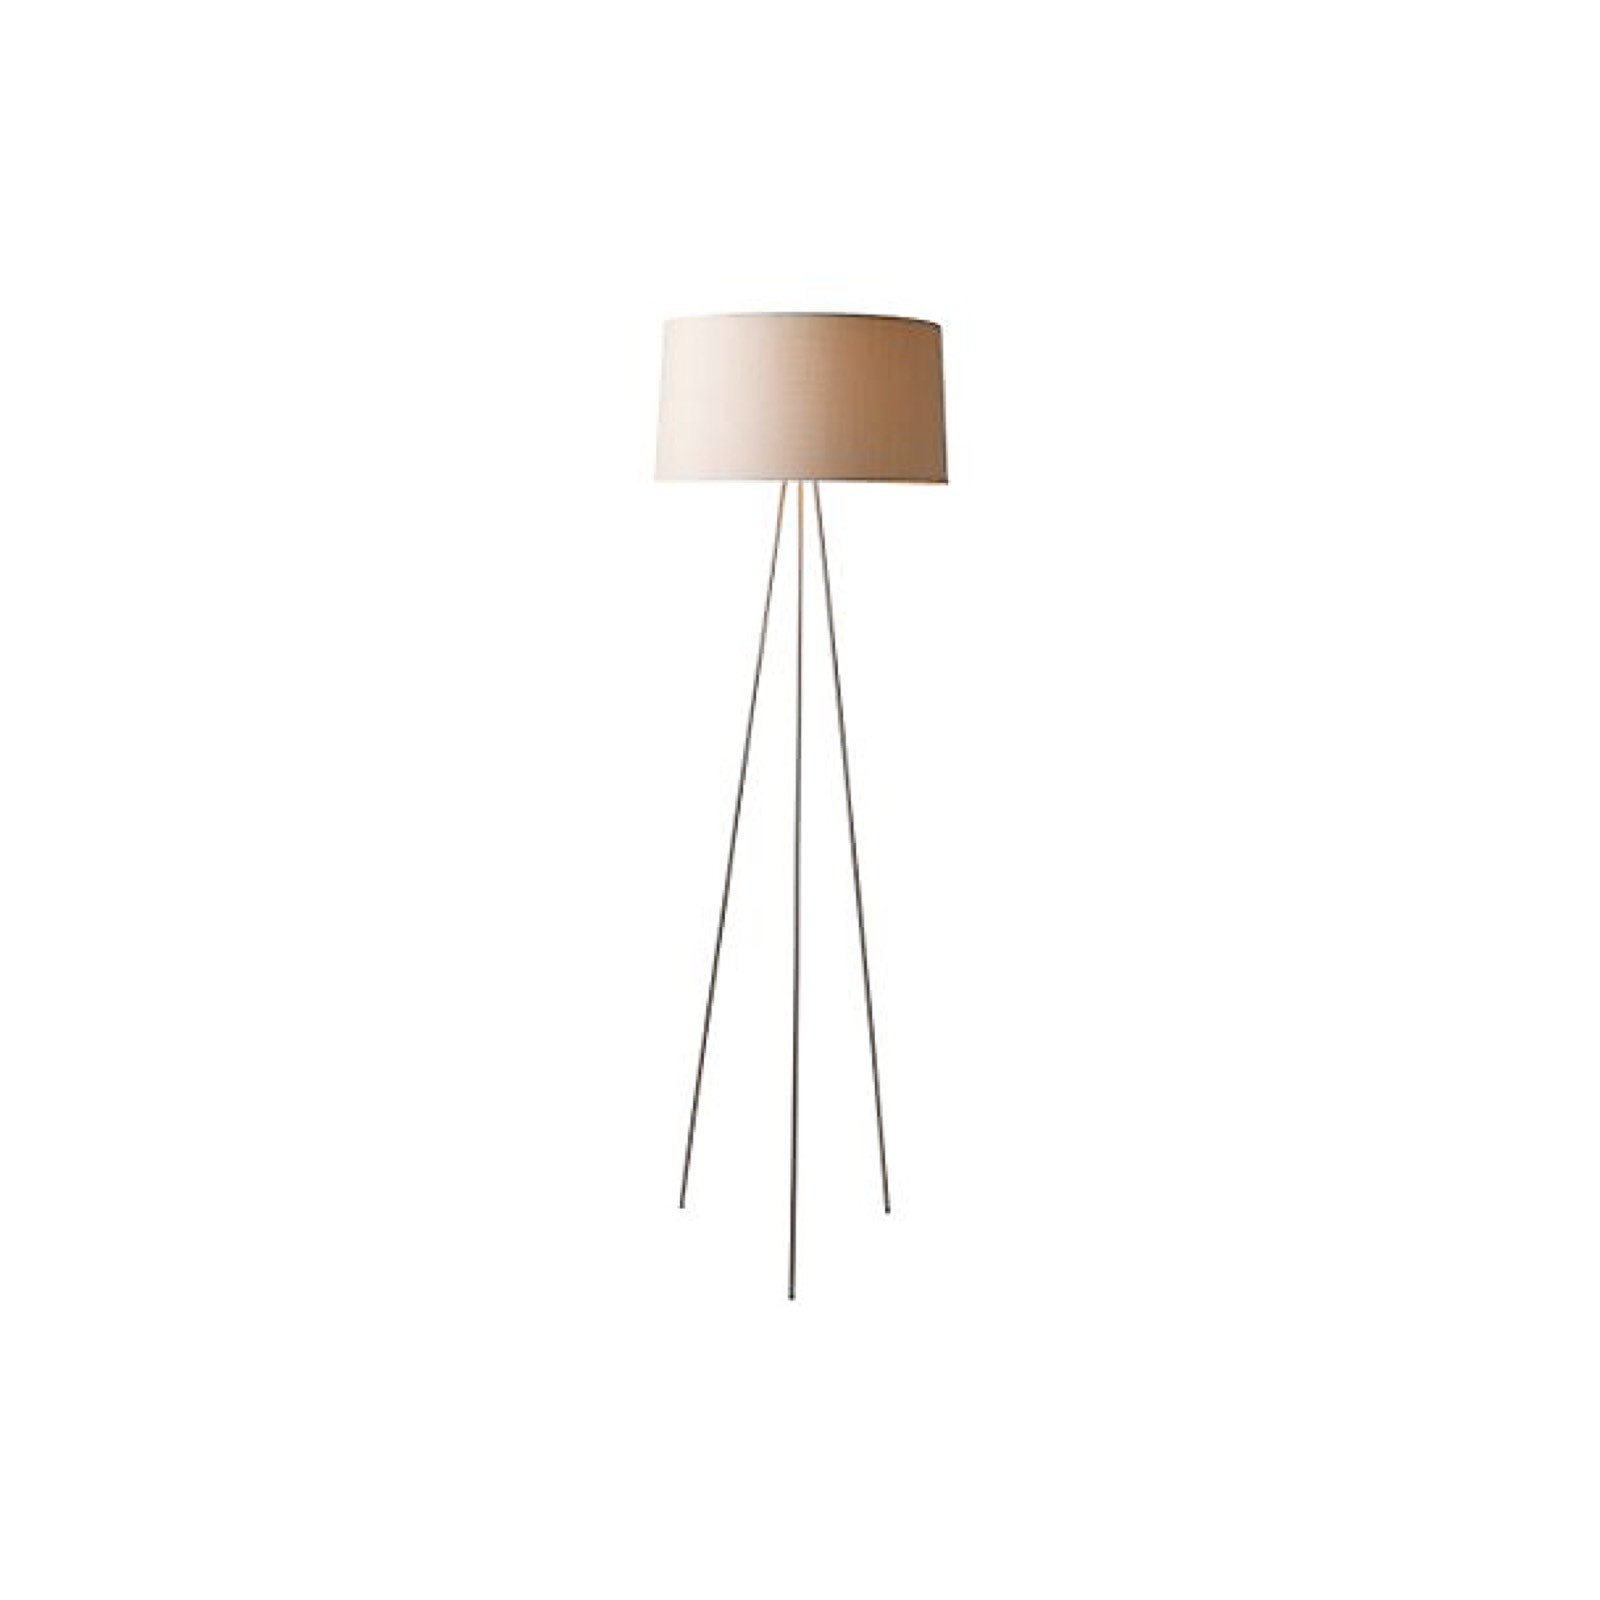 Tripod Floor Lamp Design Within Reach Dwell intended for dimensions 1600 X 1600